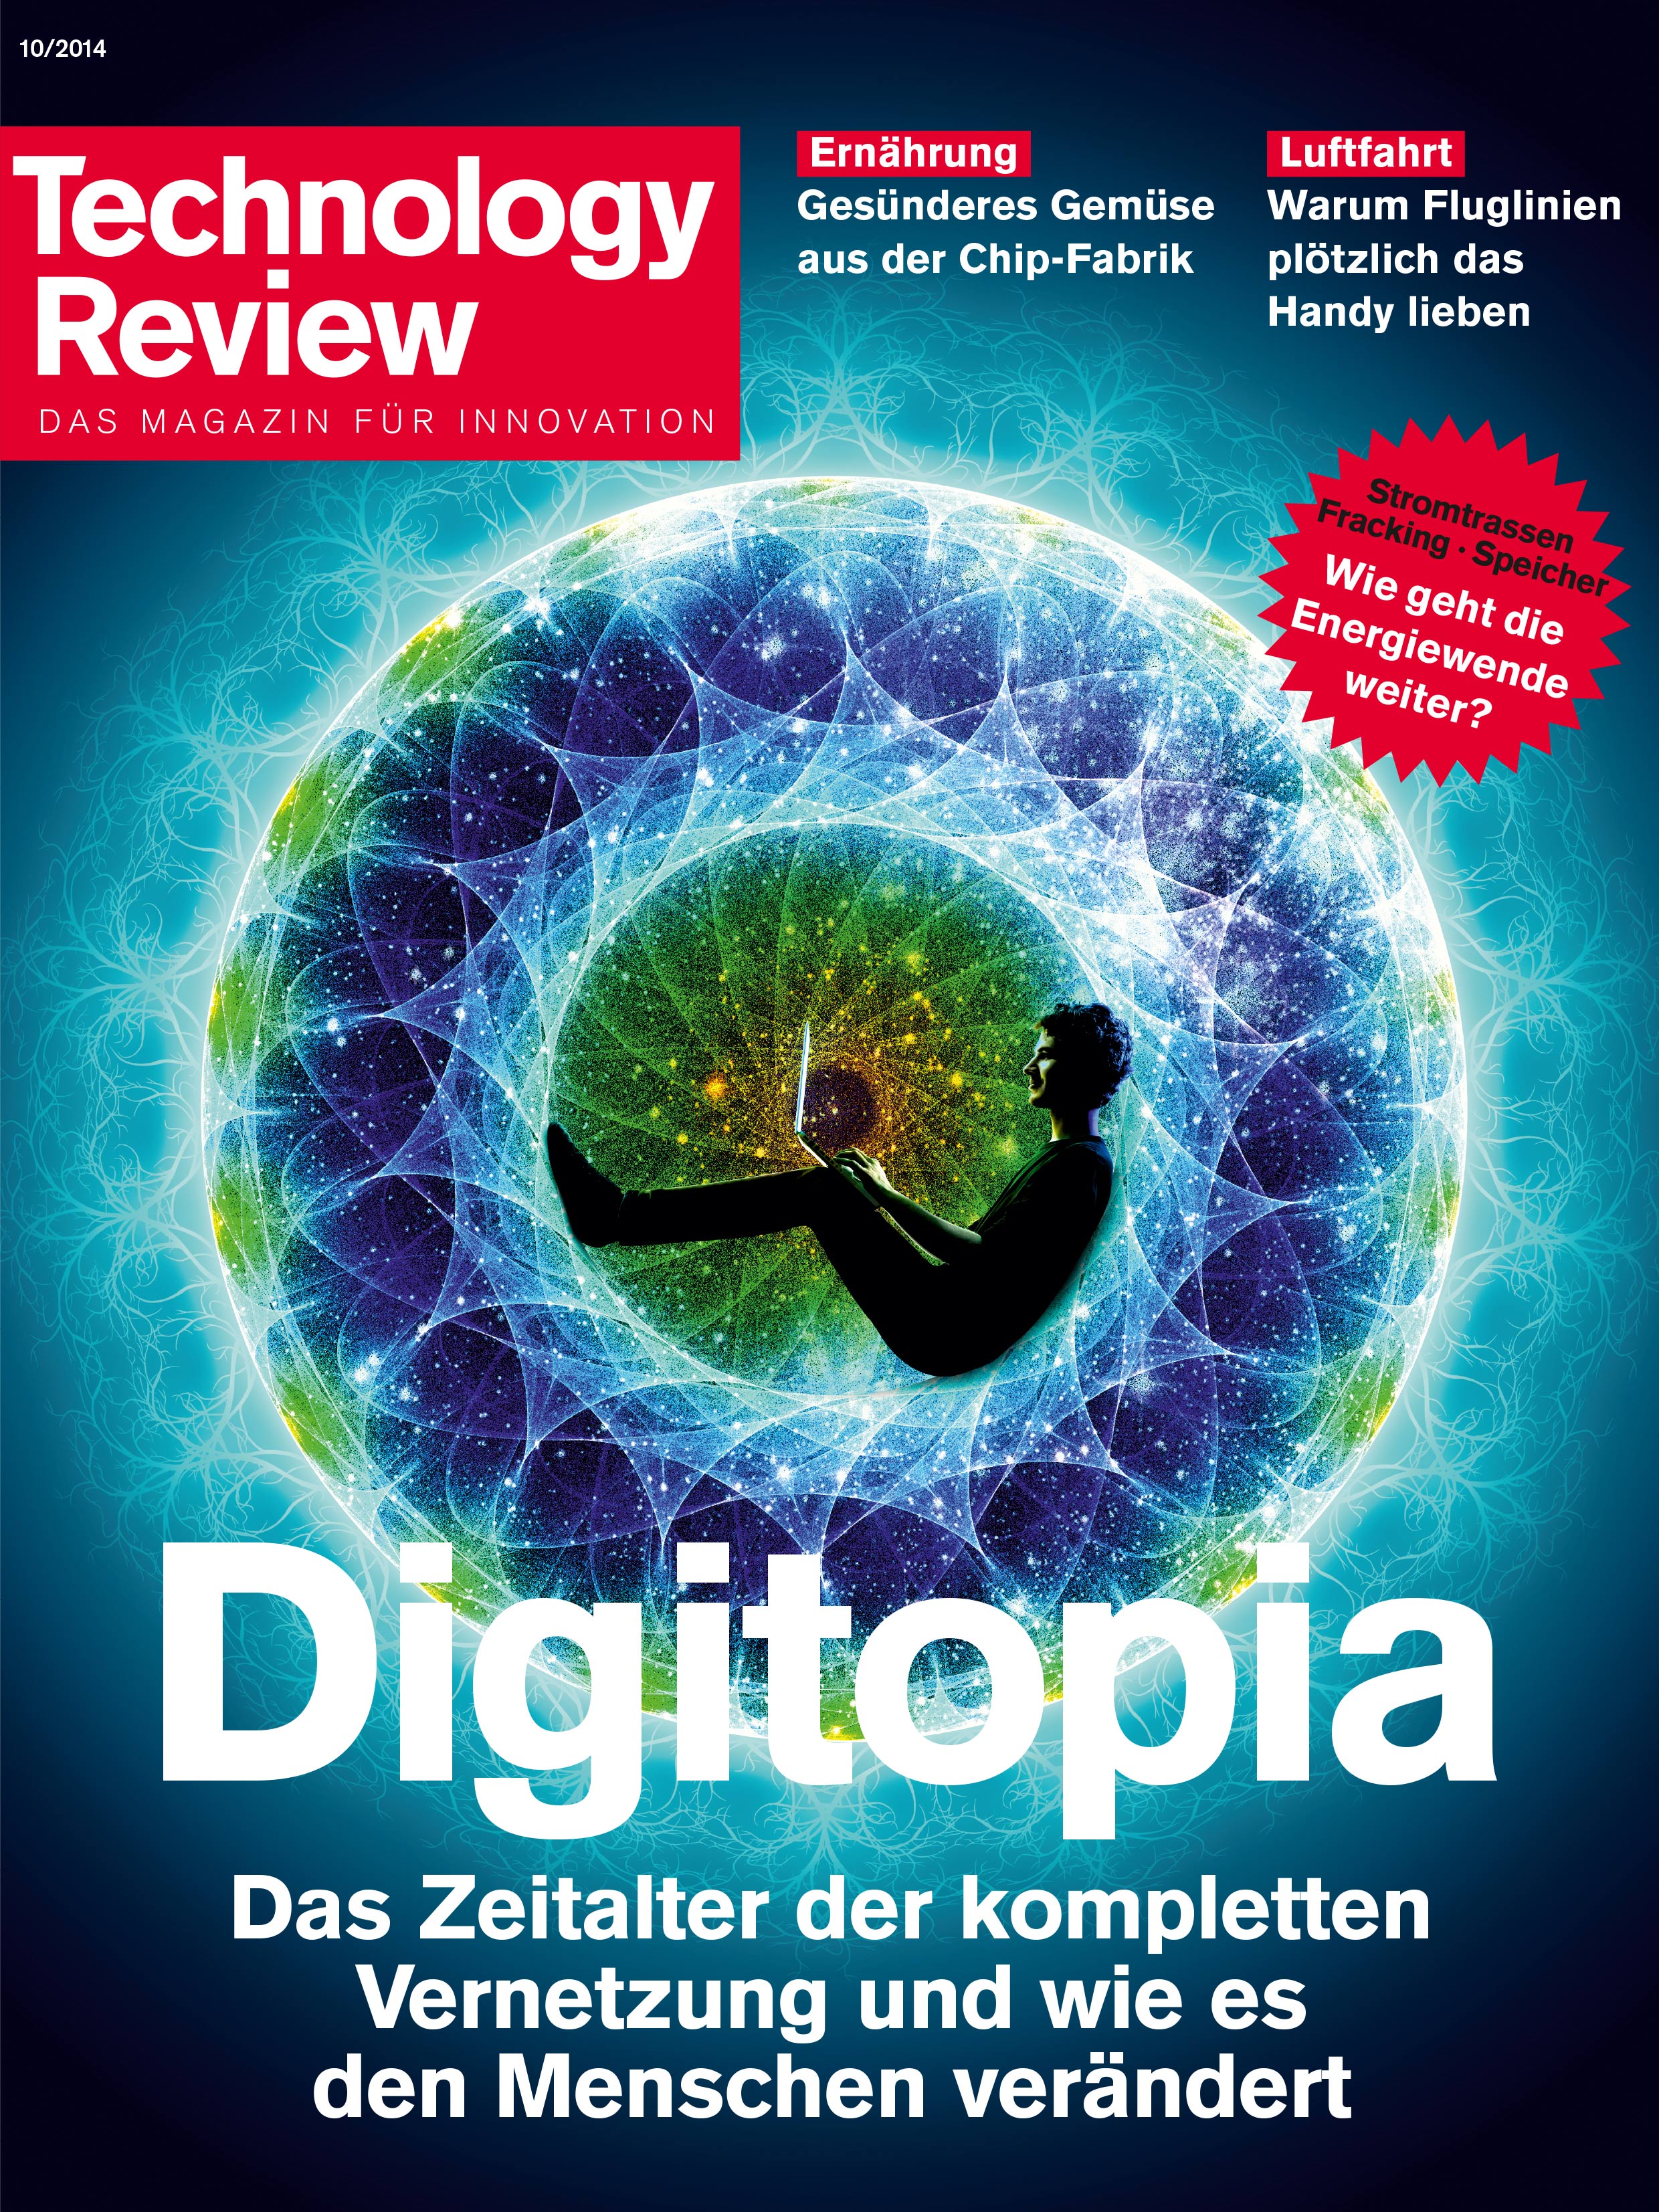 Technology Review 10/2014